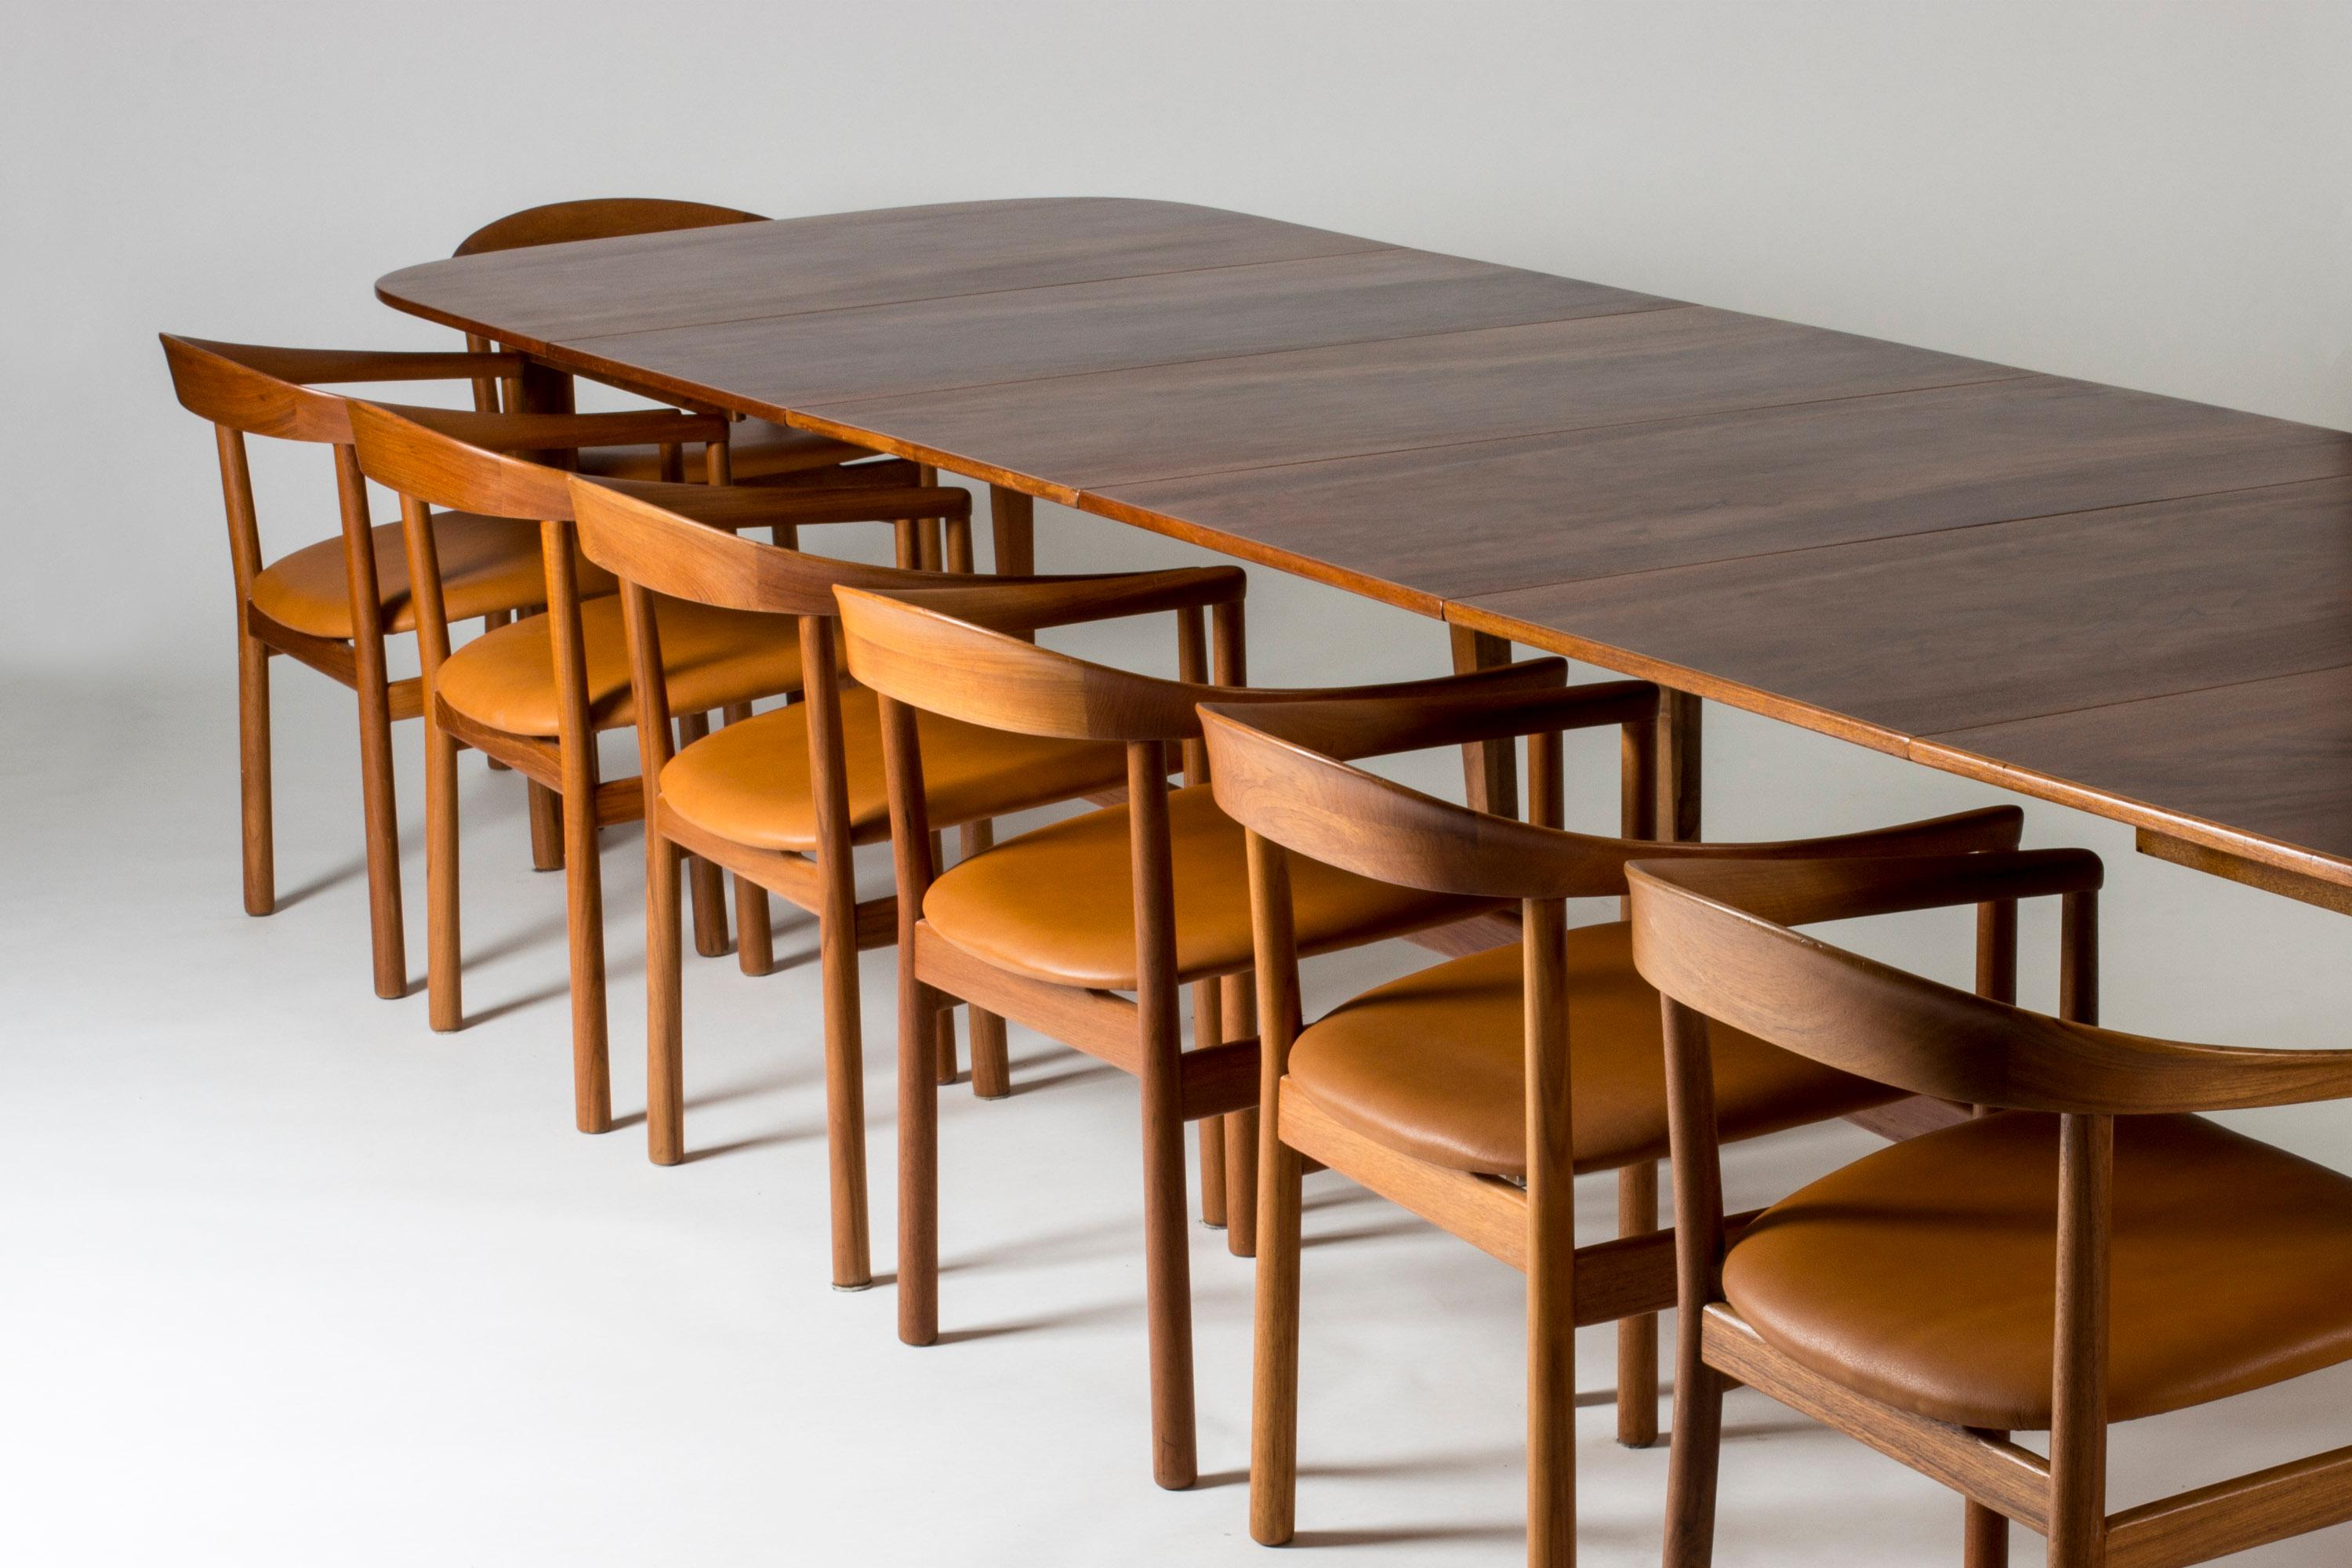 Amazing dining table by Josef Frank, made from beautiful mahogany. Rounded corners with an elegant inlaid line around the edge. The table has four extension leaves and seats fourteen people when fully extended. When three or four leaves are added,